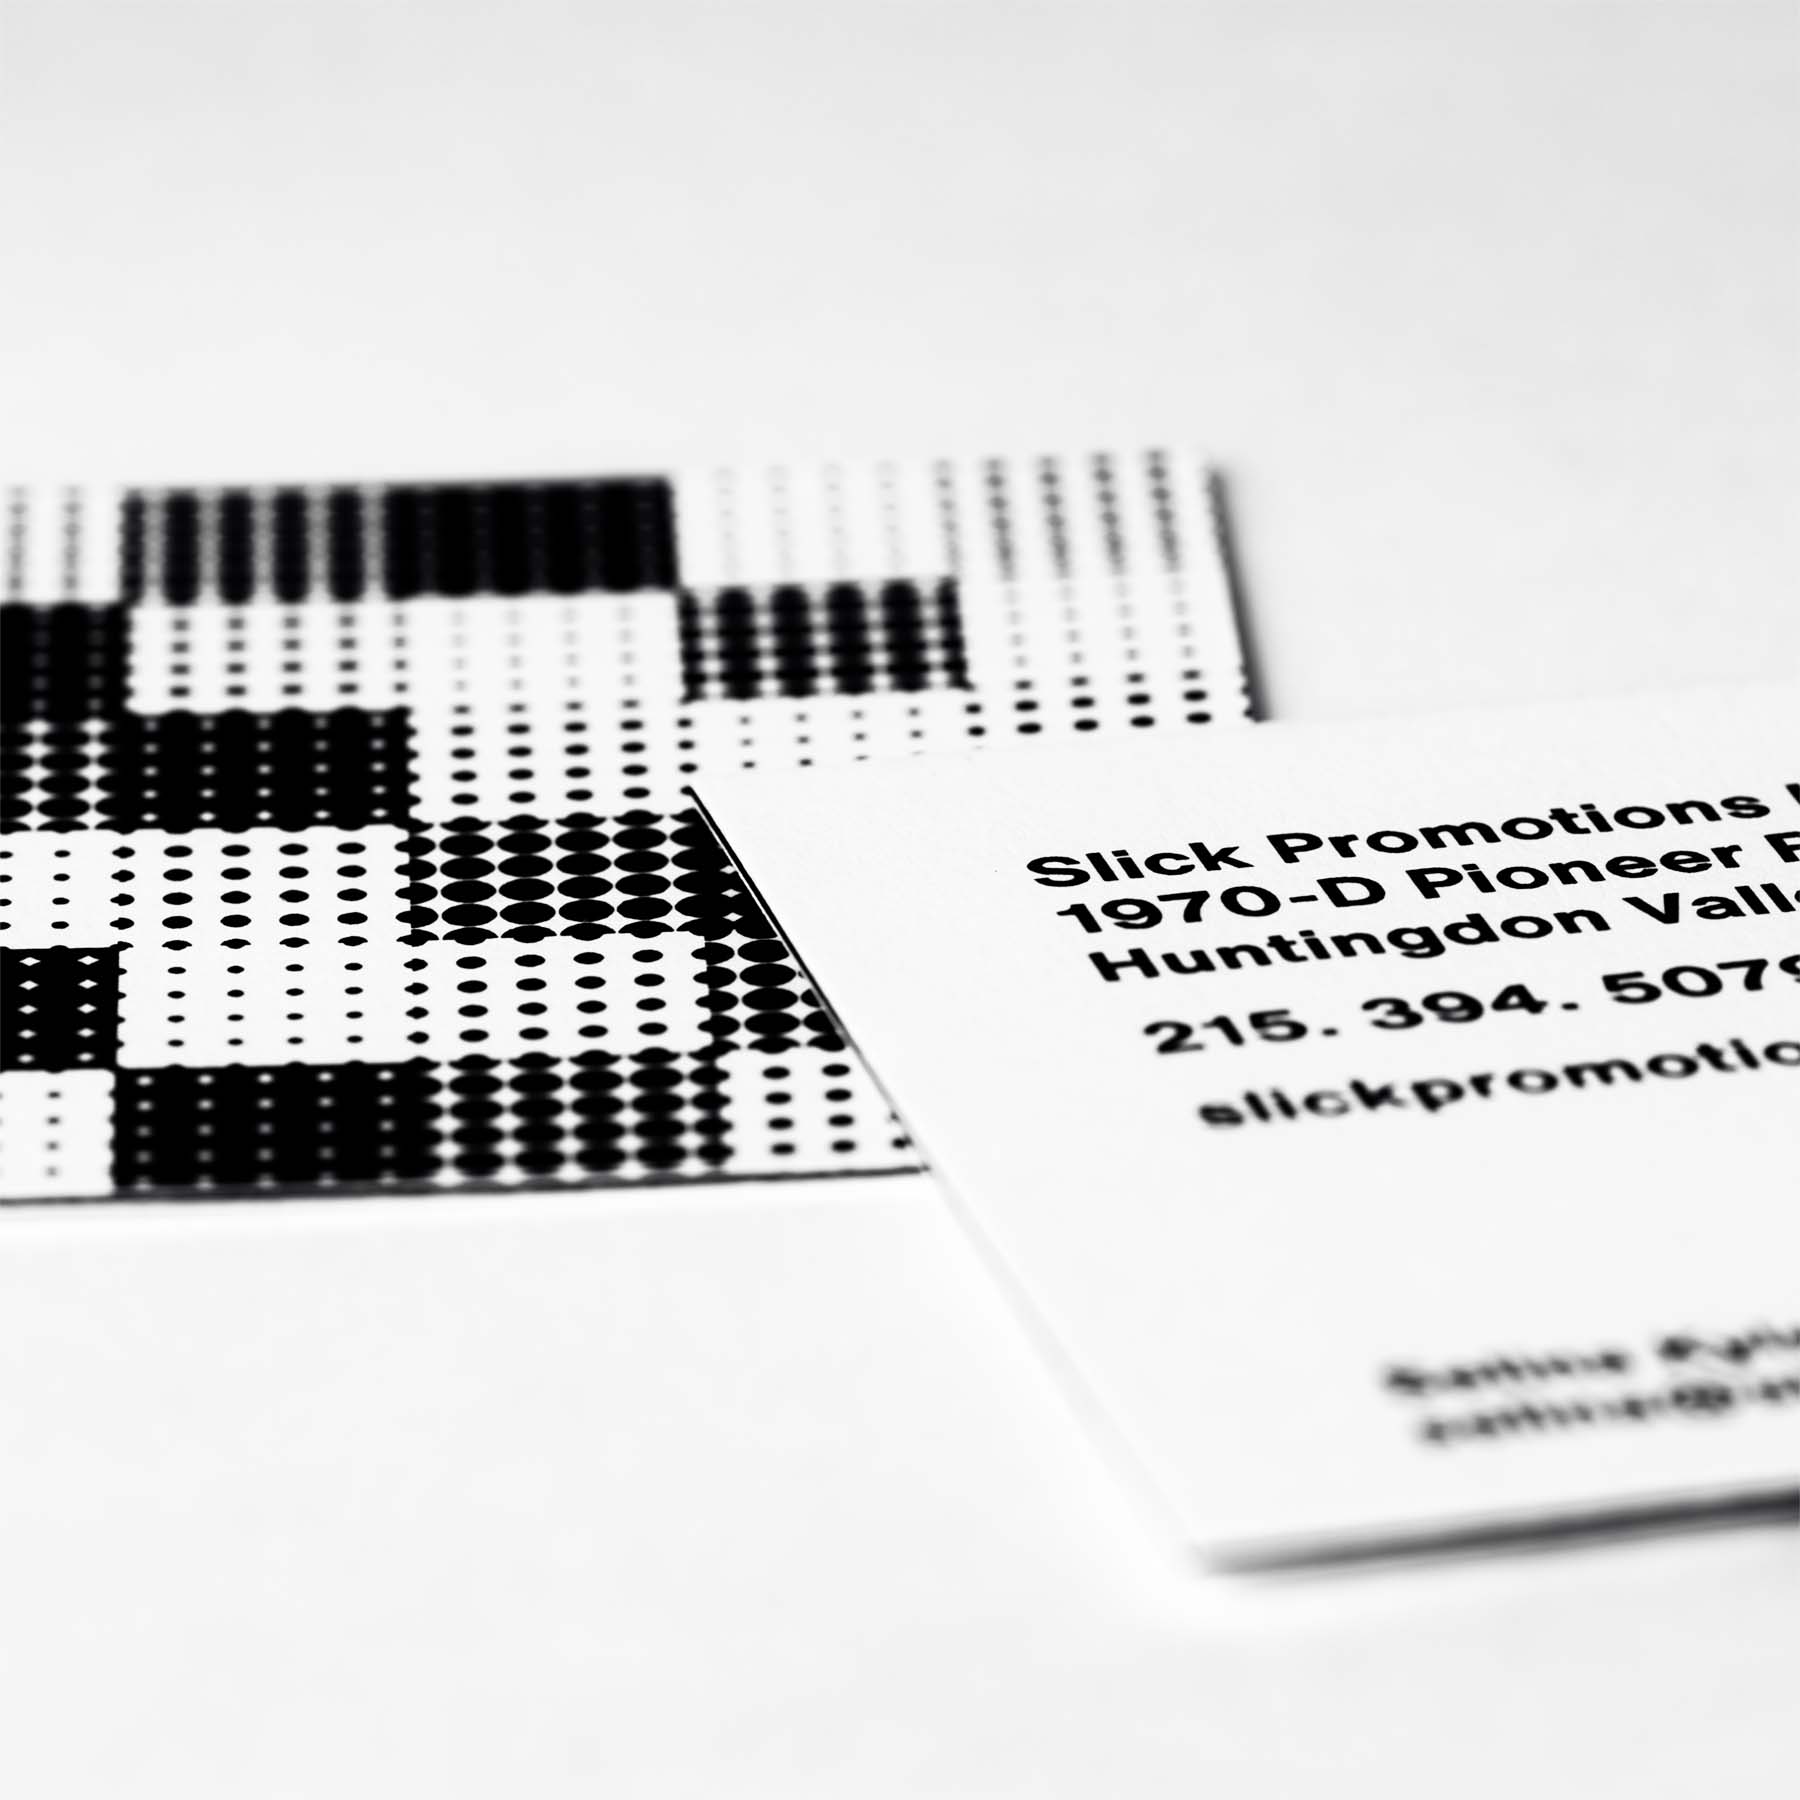 Square business card featuring full Slick Promotions logo on front.